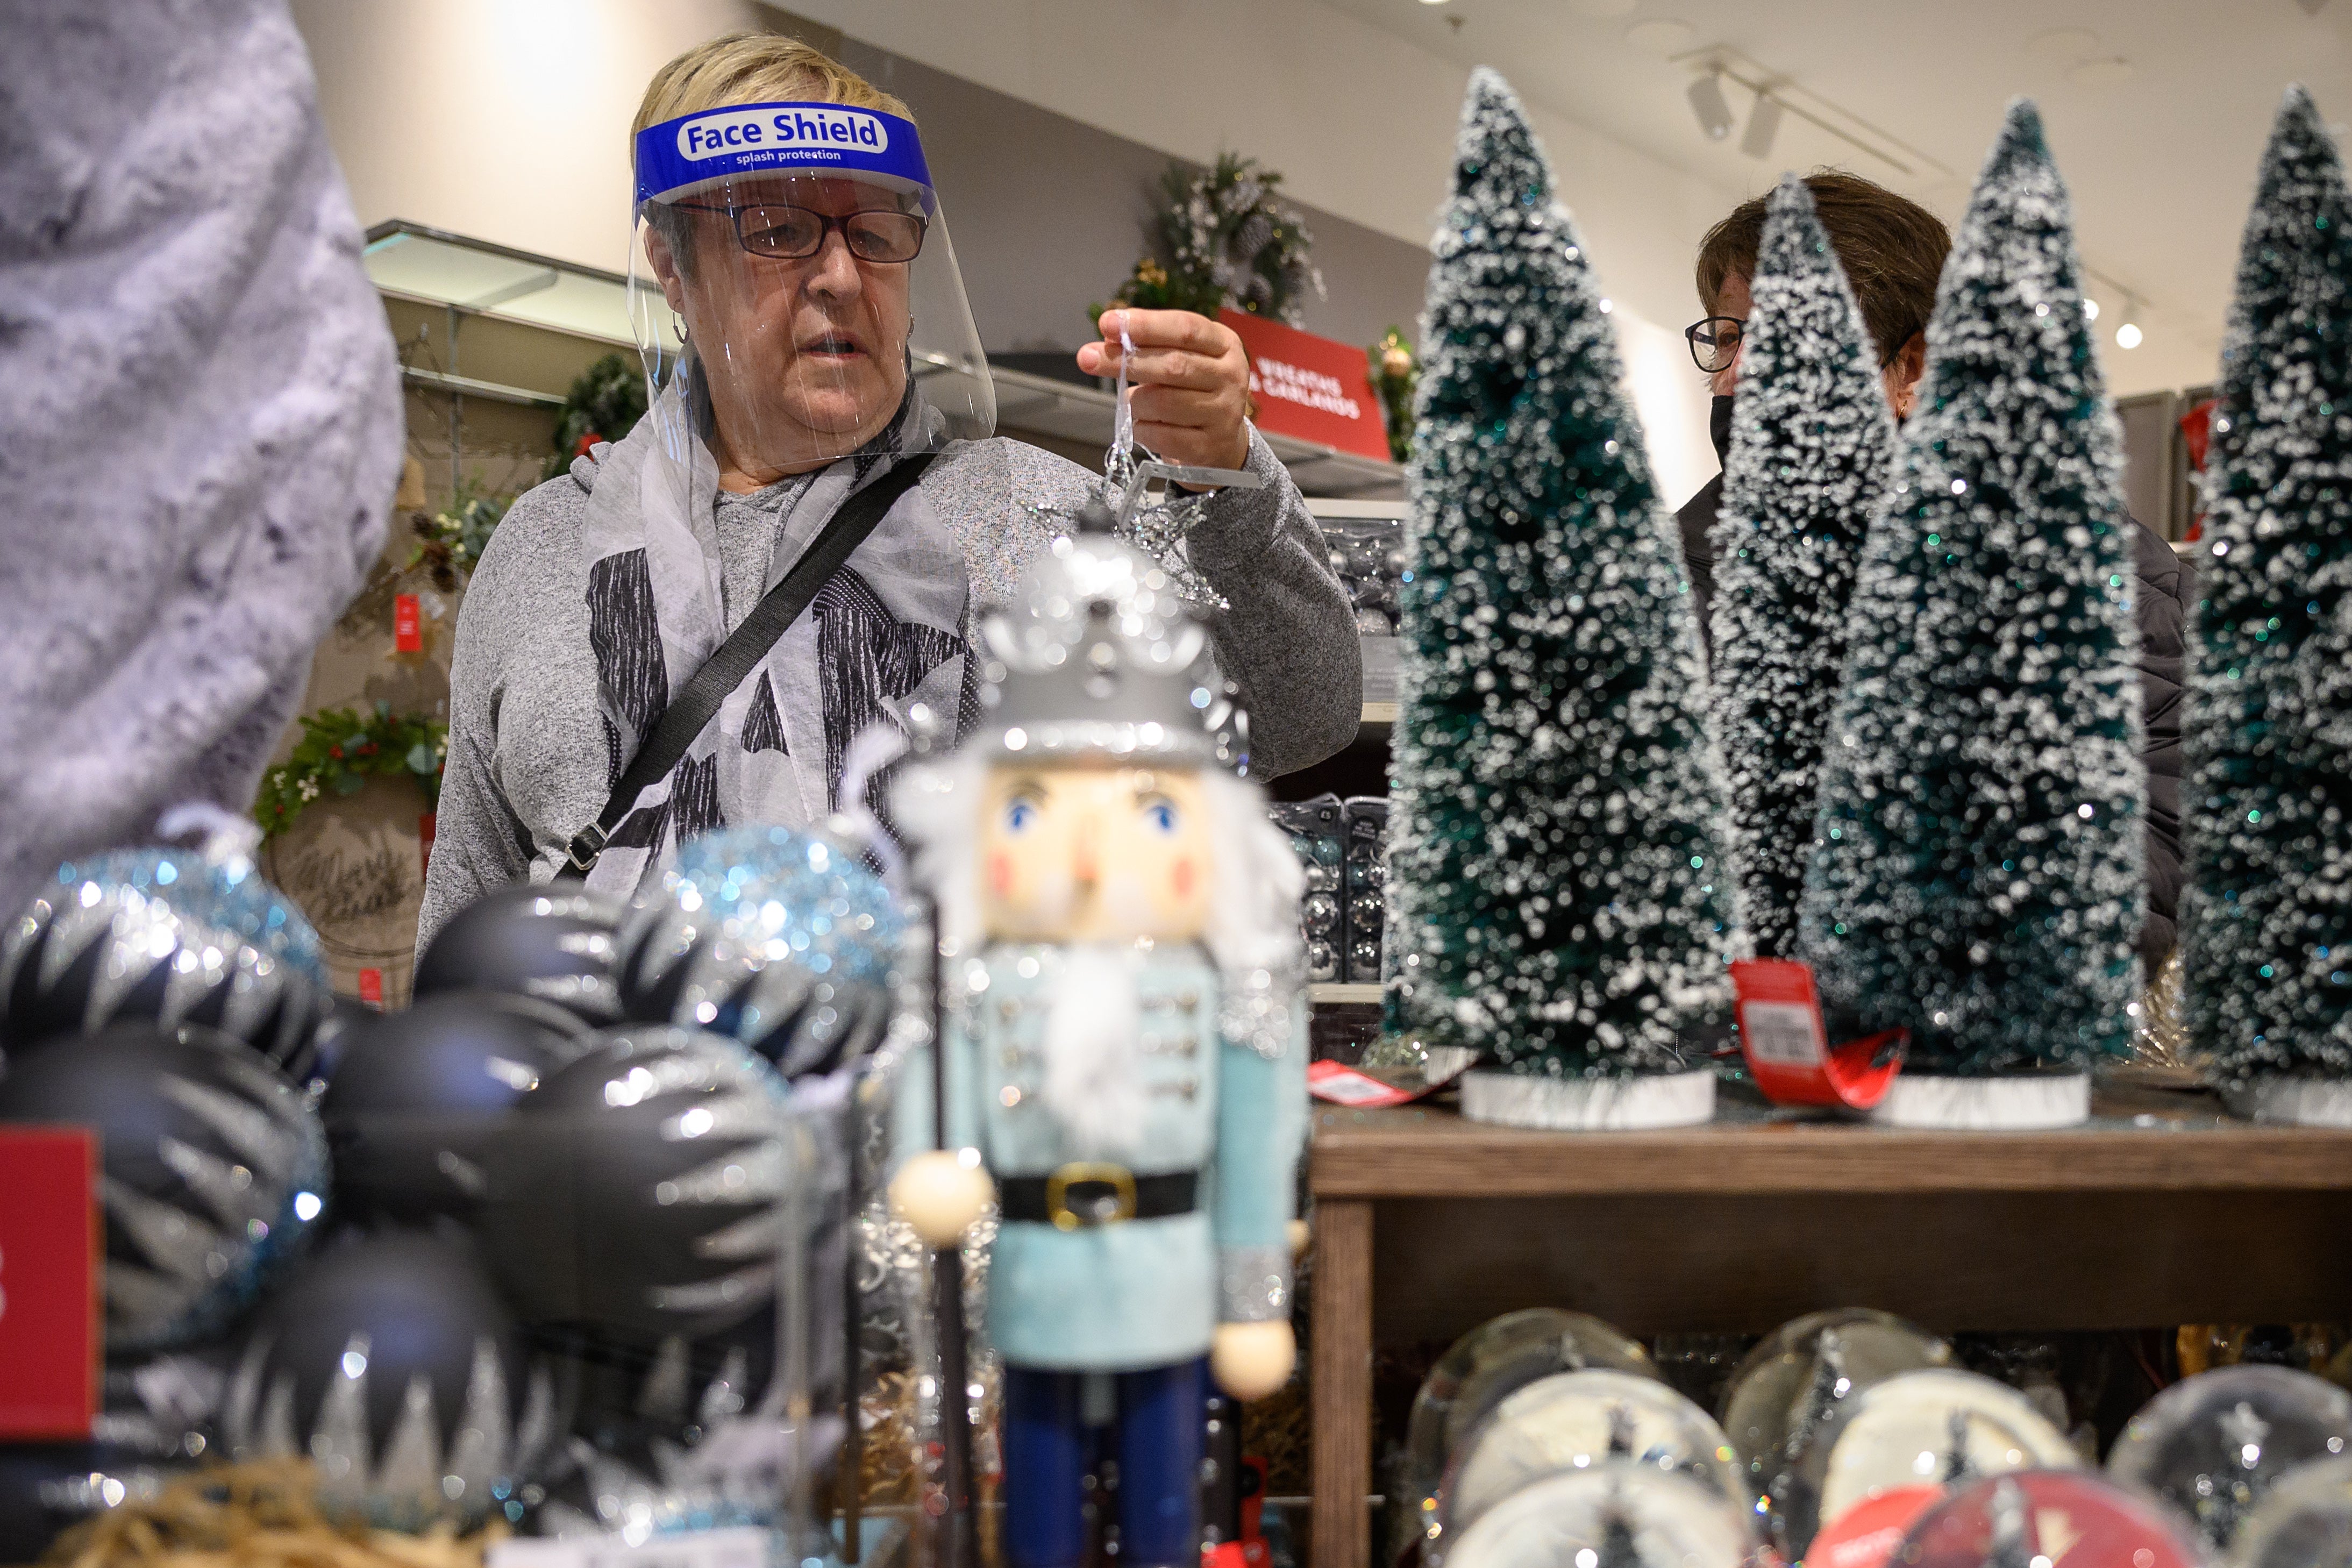 A customer browses some of the festive items in the Christmas gift and decoration section